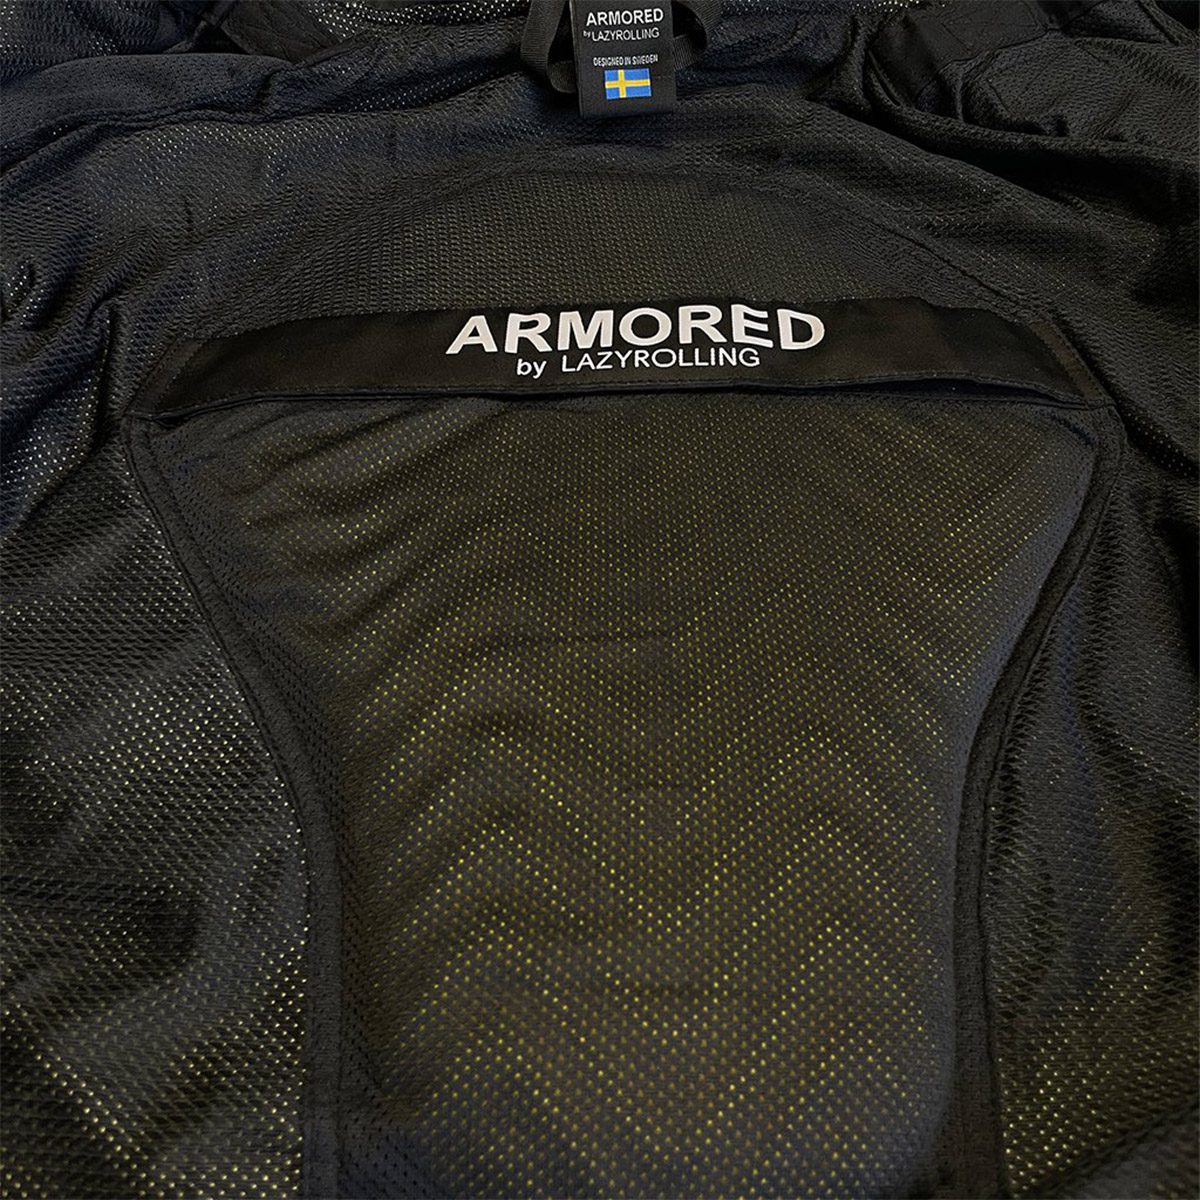 ARMORED x PET Black on Black Reflective Jacket by Lazyrolling 